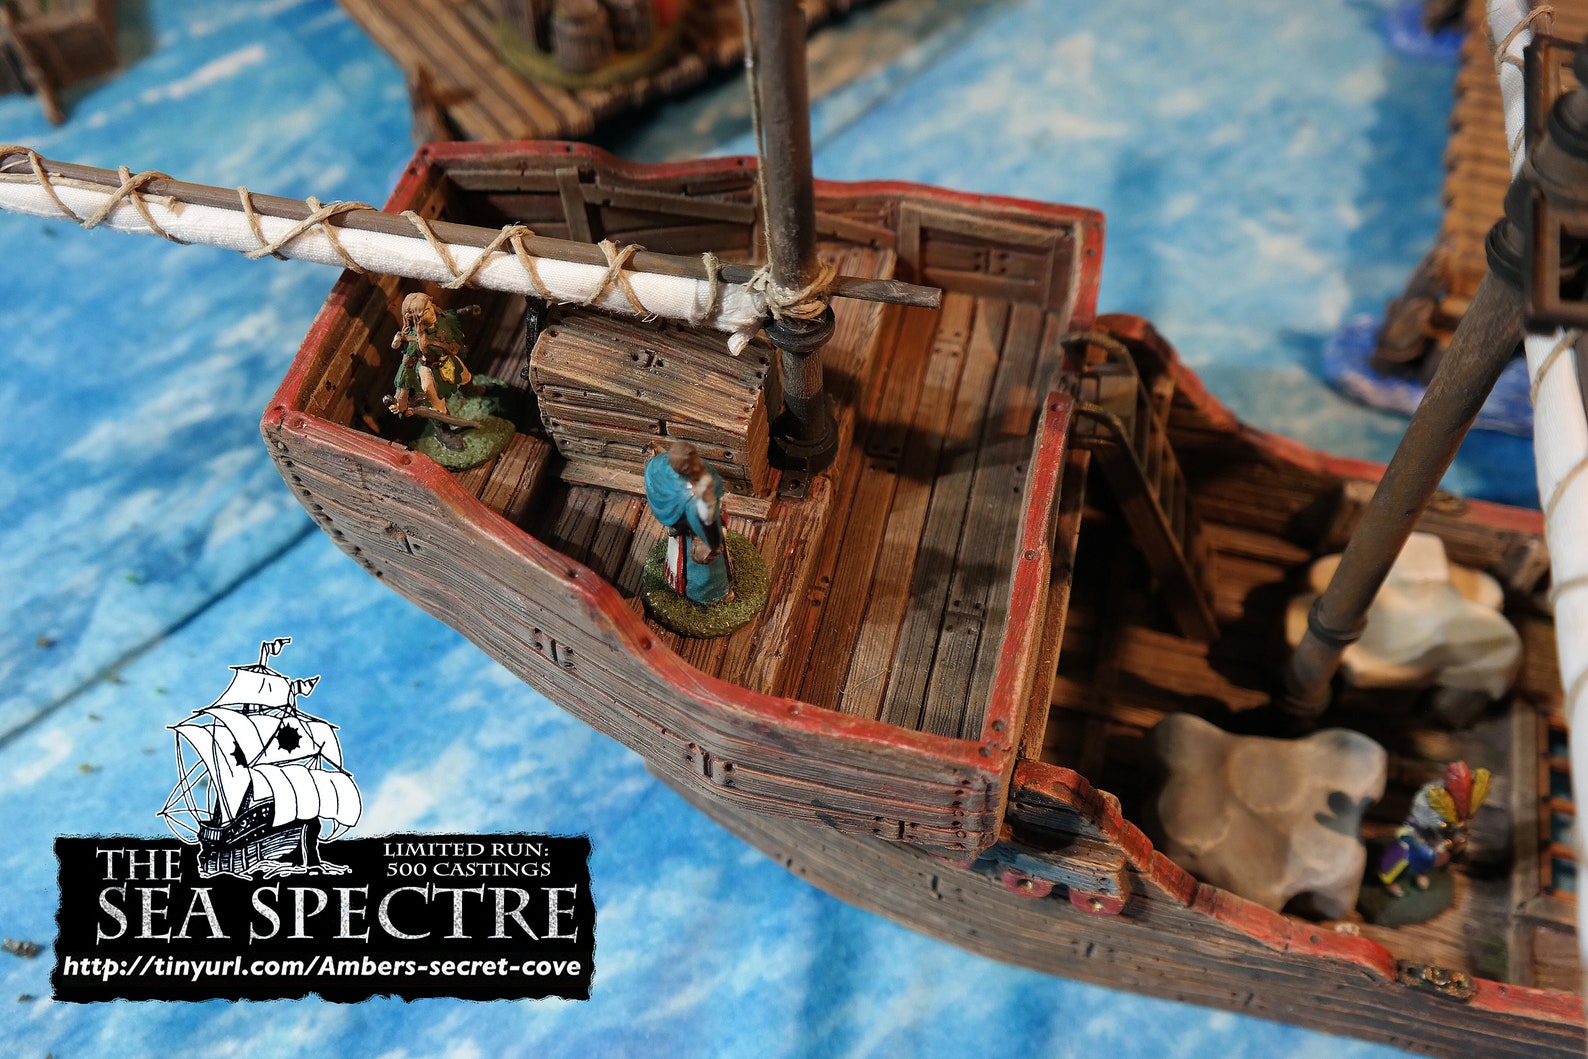 The Sea Spectre 28mm Tabletop Sailing Ship Limited to 500 - Etsy